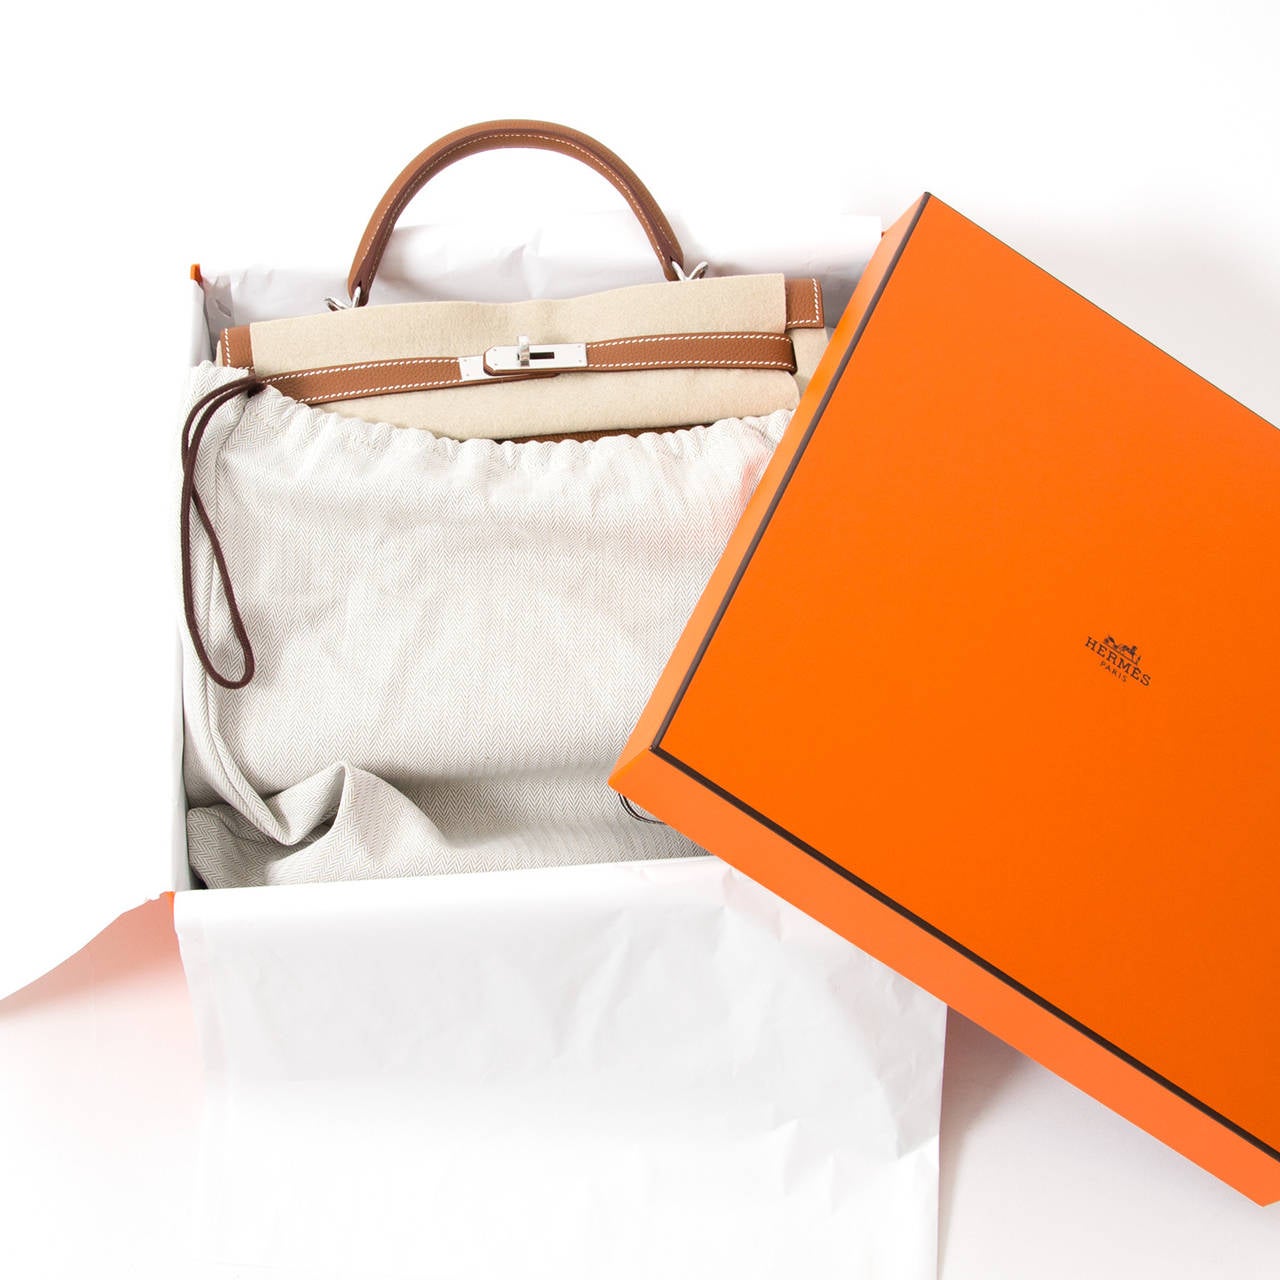 Hermès Kelly bag, freshly bought from the Hermès store, made in 2015.
Rainjacket, clochette cadenas and dustbag included. 
'Gold' color and Paladium hardware throughout. 
Togo calfskin, renowned for its supple yet structure giving quality.